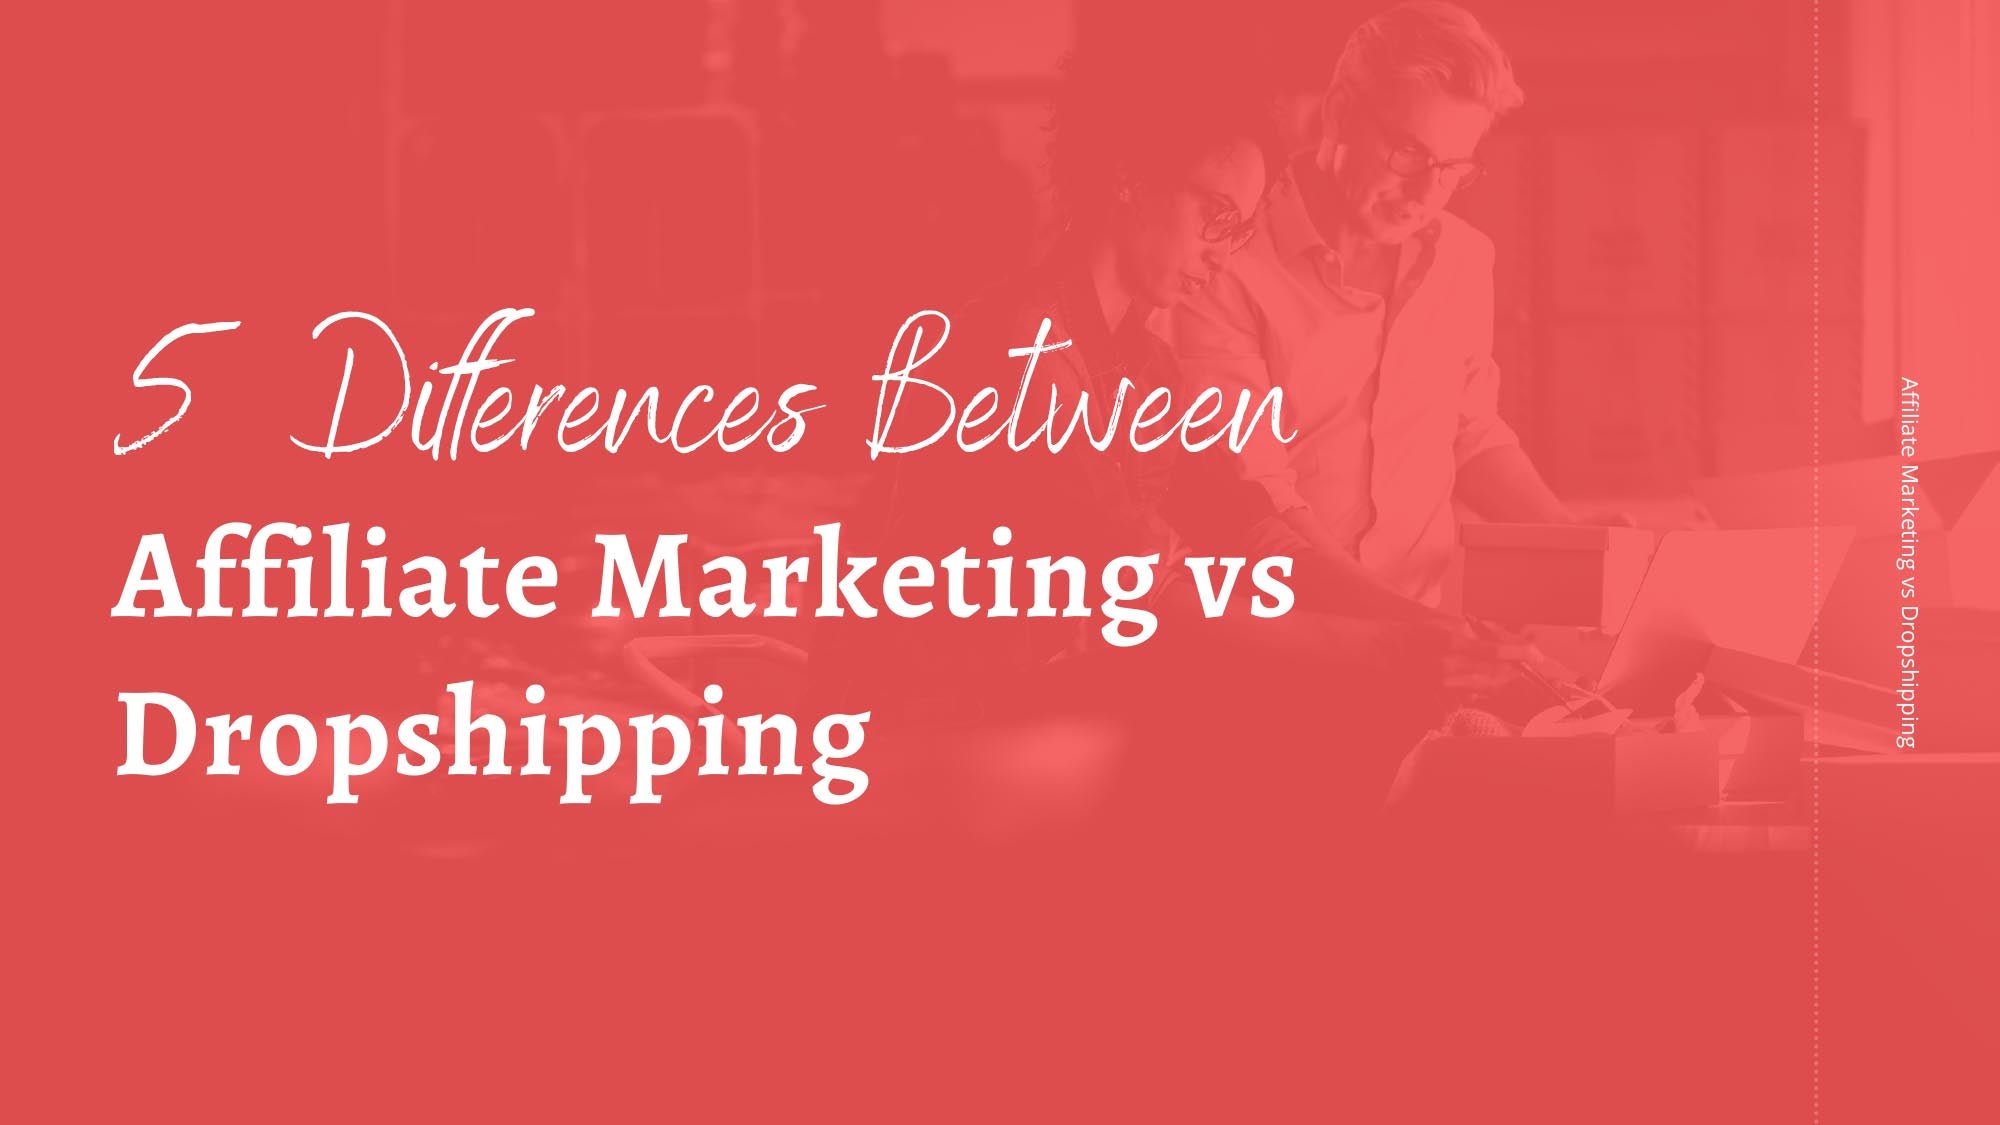 5 Exclusive Differences Between Affiliate Marketing vs Dropshipping